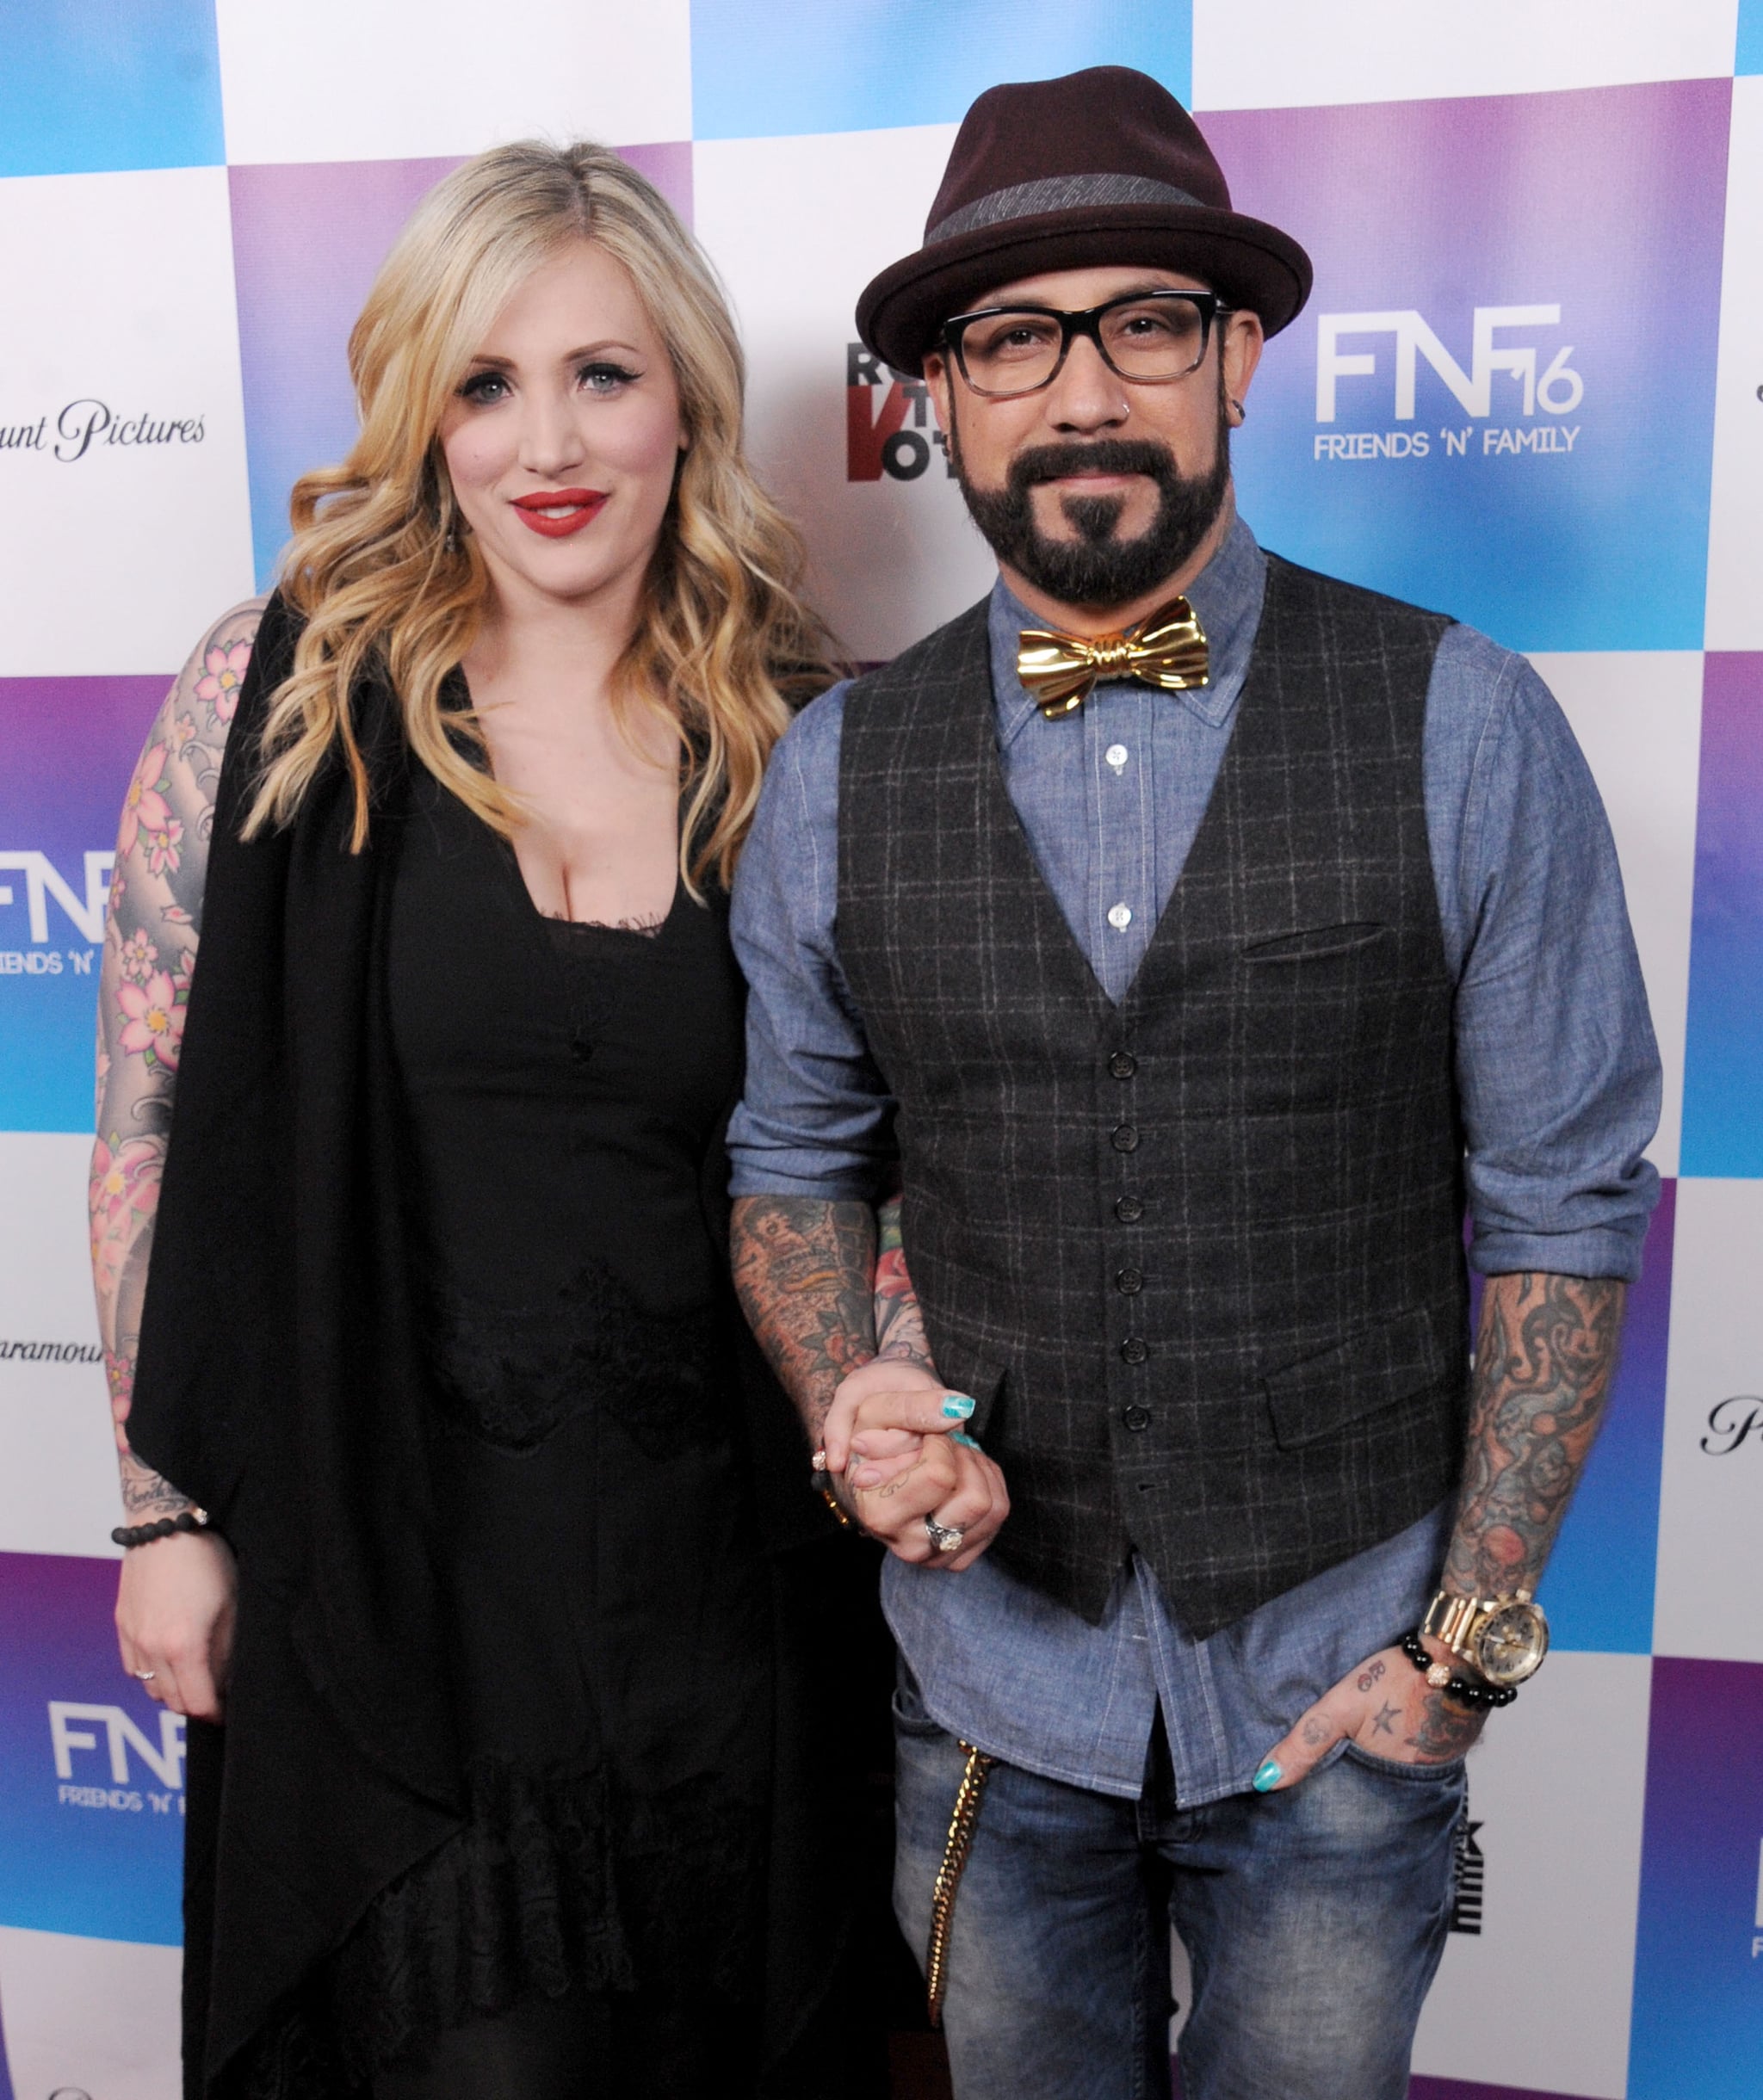 Which Backstreet Boys Are Married?